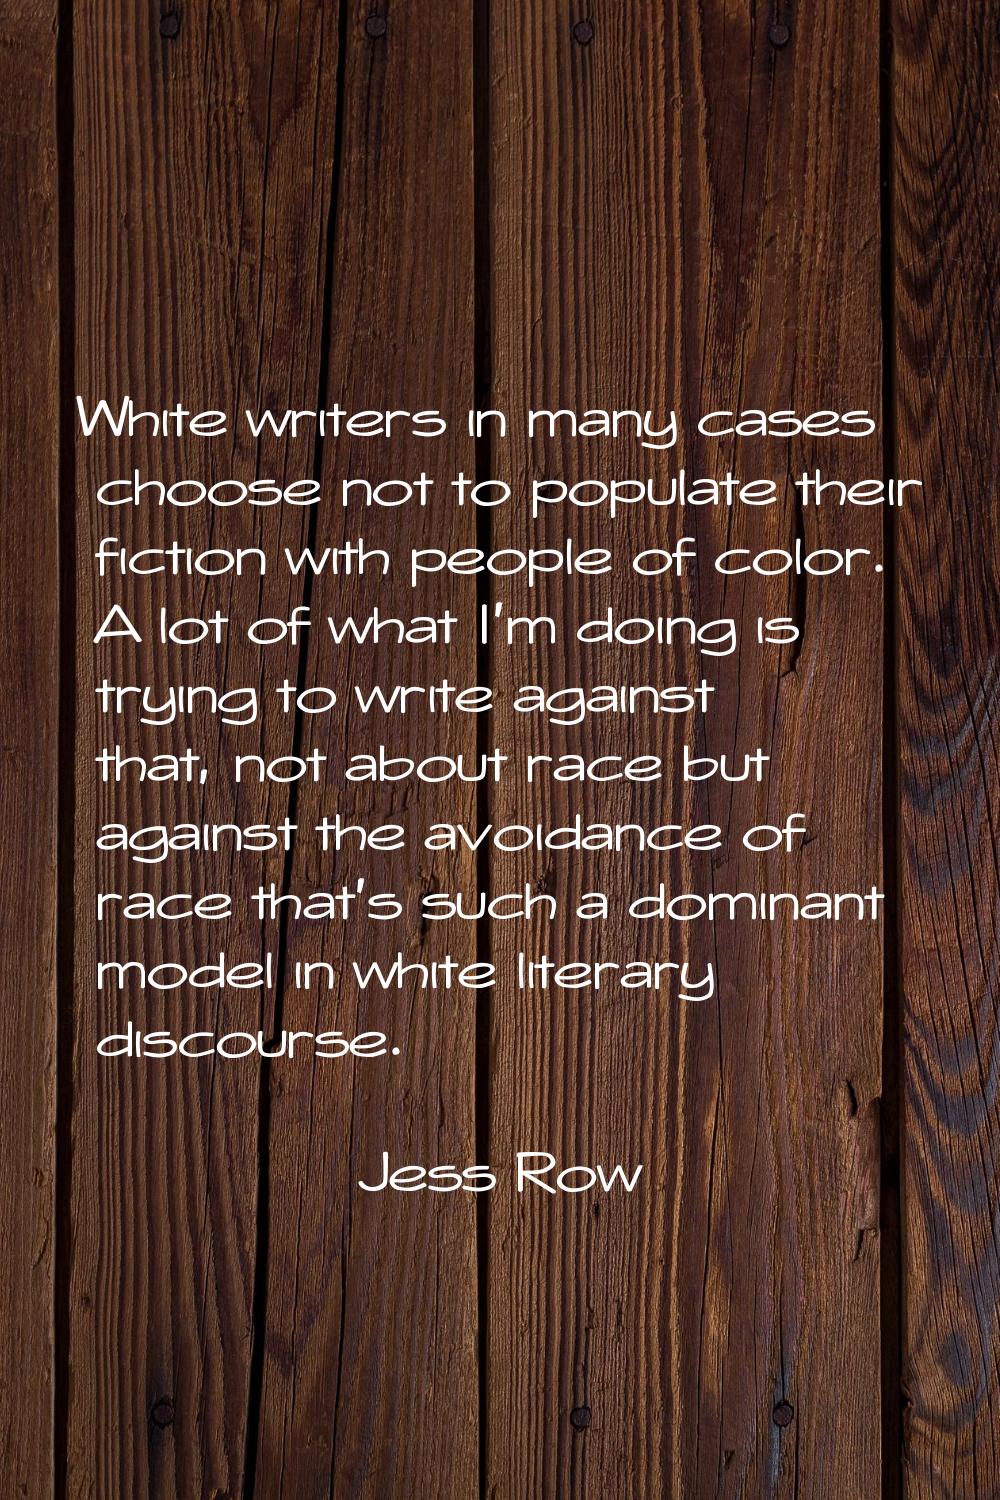 White writers in many cases choose not to populate their fiction with people of color. A lot of wha